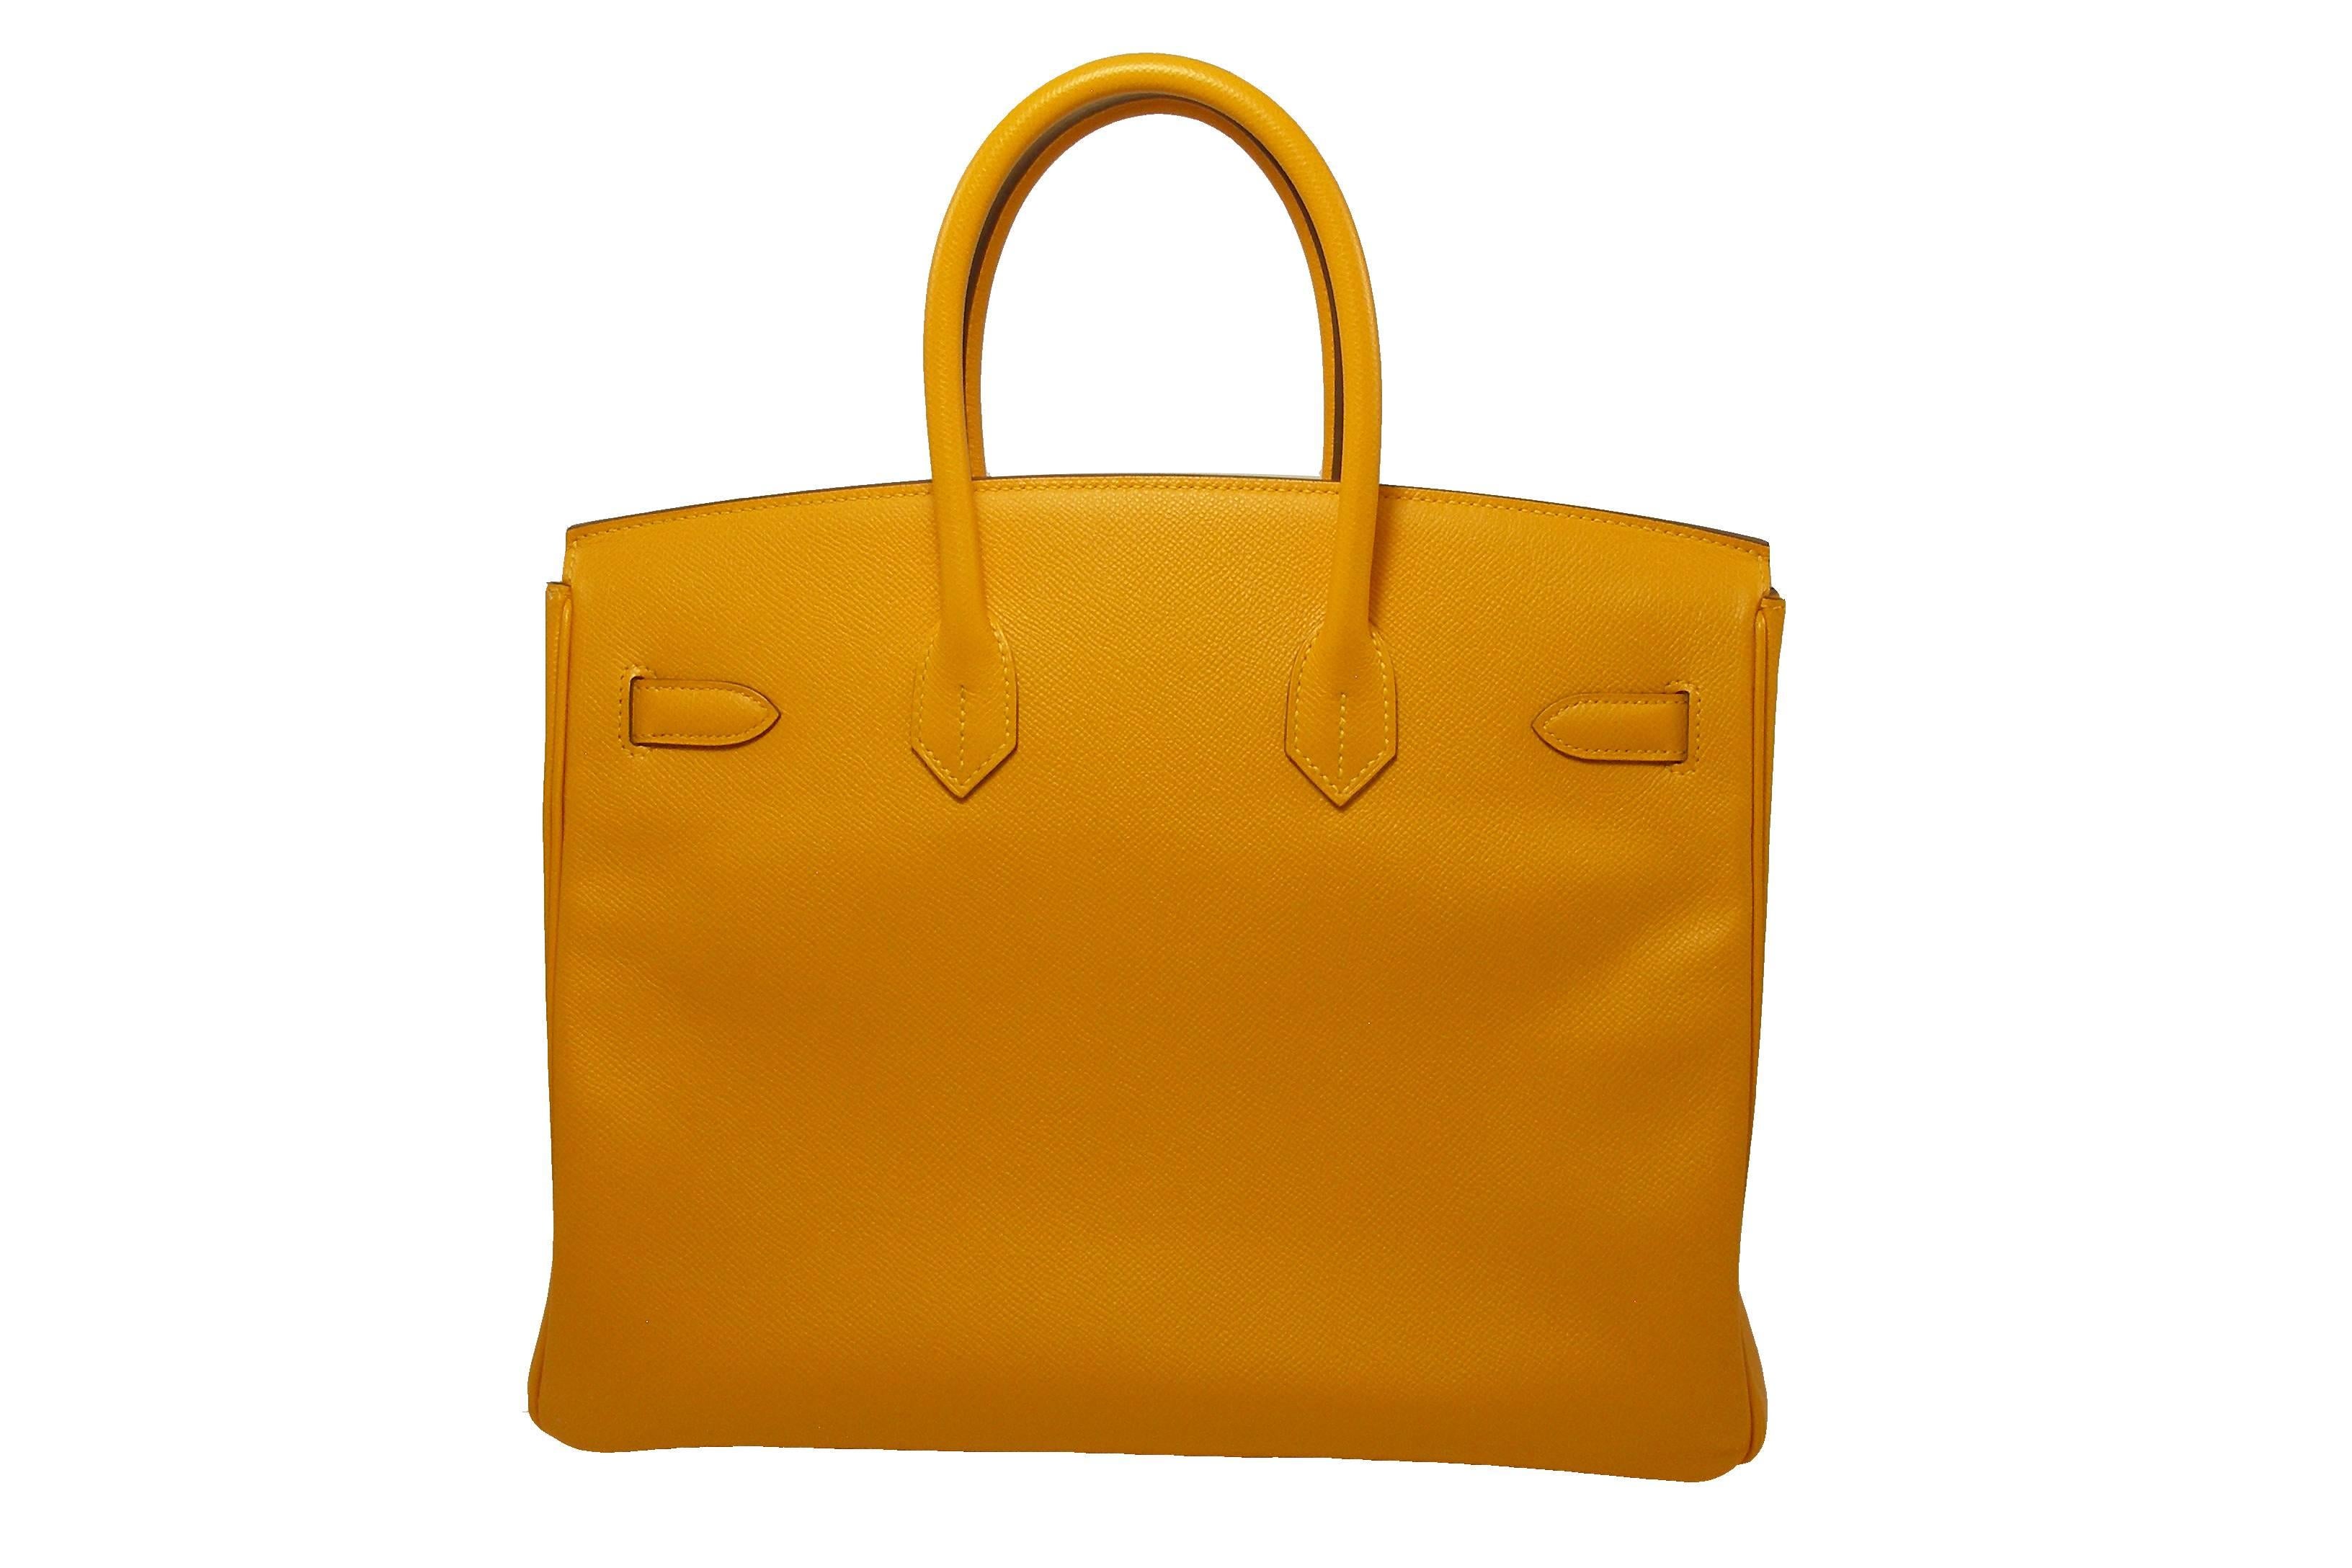 FAN-TAS-TIC  Hermès Birkin bag in 35 cm
Epsom leather and color is bouton d'or 
Stamp : P
BRAND NEW  / NEVER USED
Plastic are still on hadware 
Please considere for this purchase : This Birkin has a Sales number under Made In France. It comes from